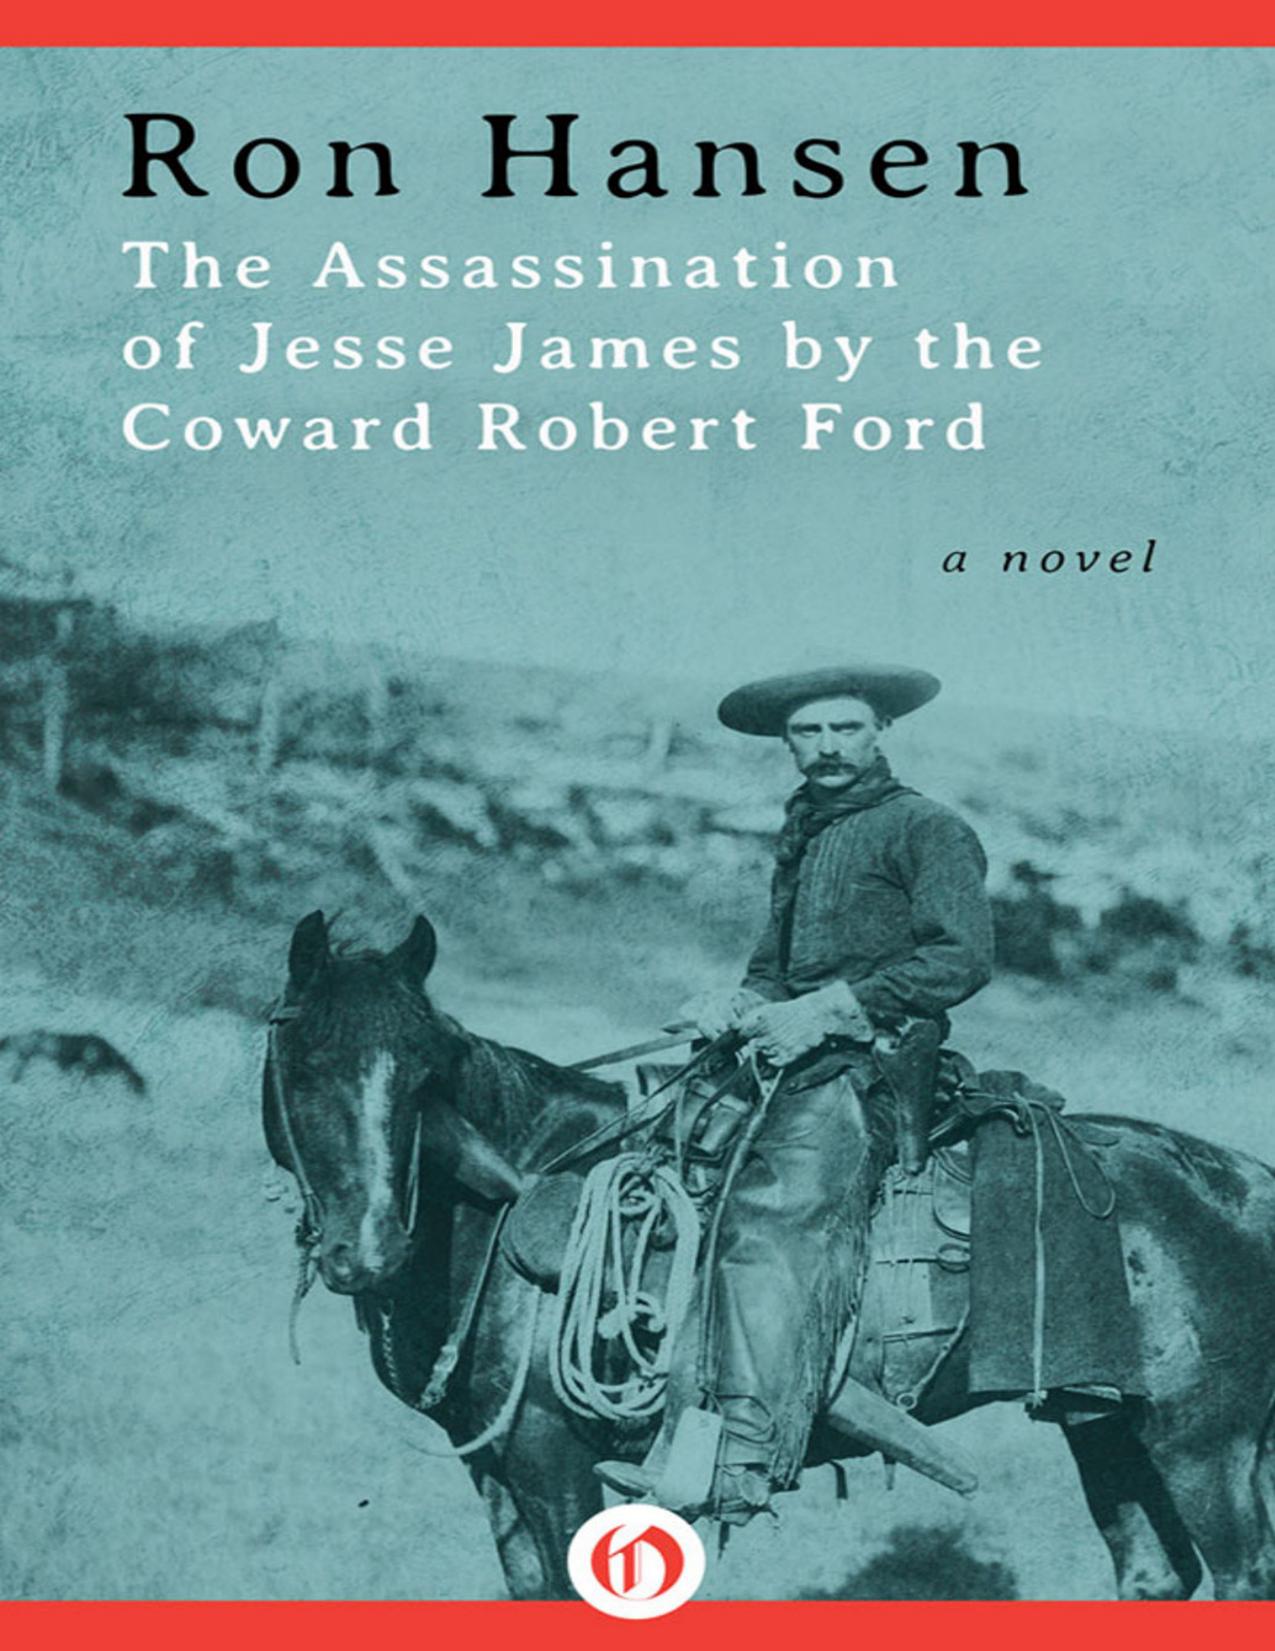 The Assassination of Jesse James by the Coward Robert Ford: A Novel by Ron Hansen